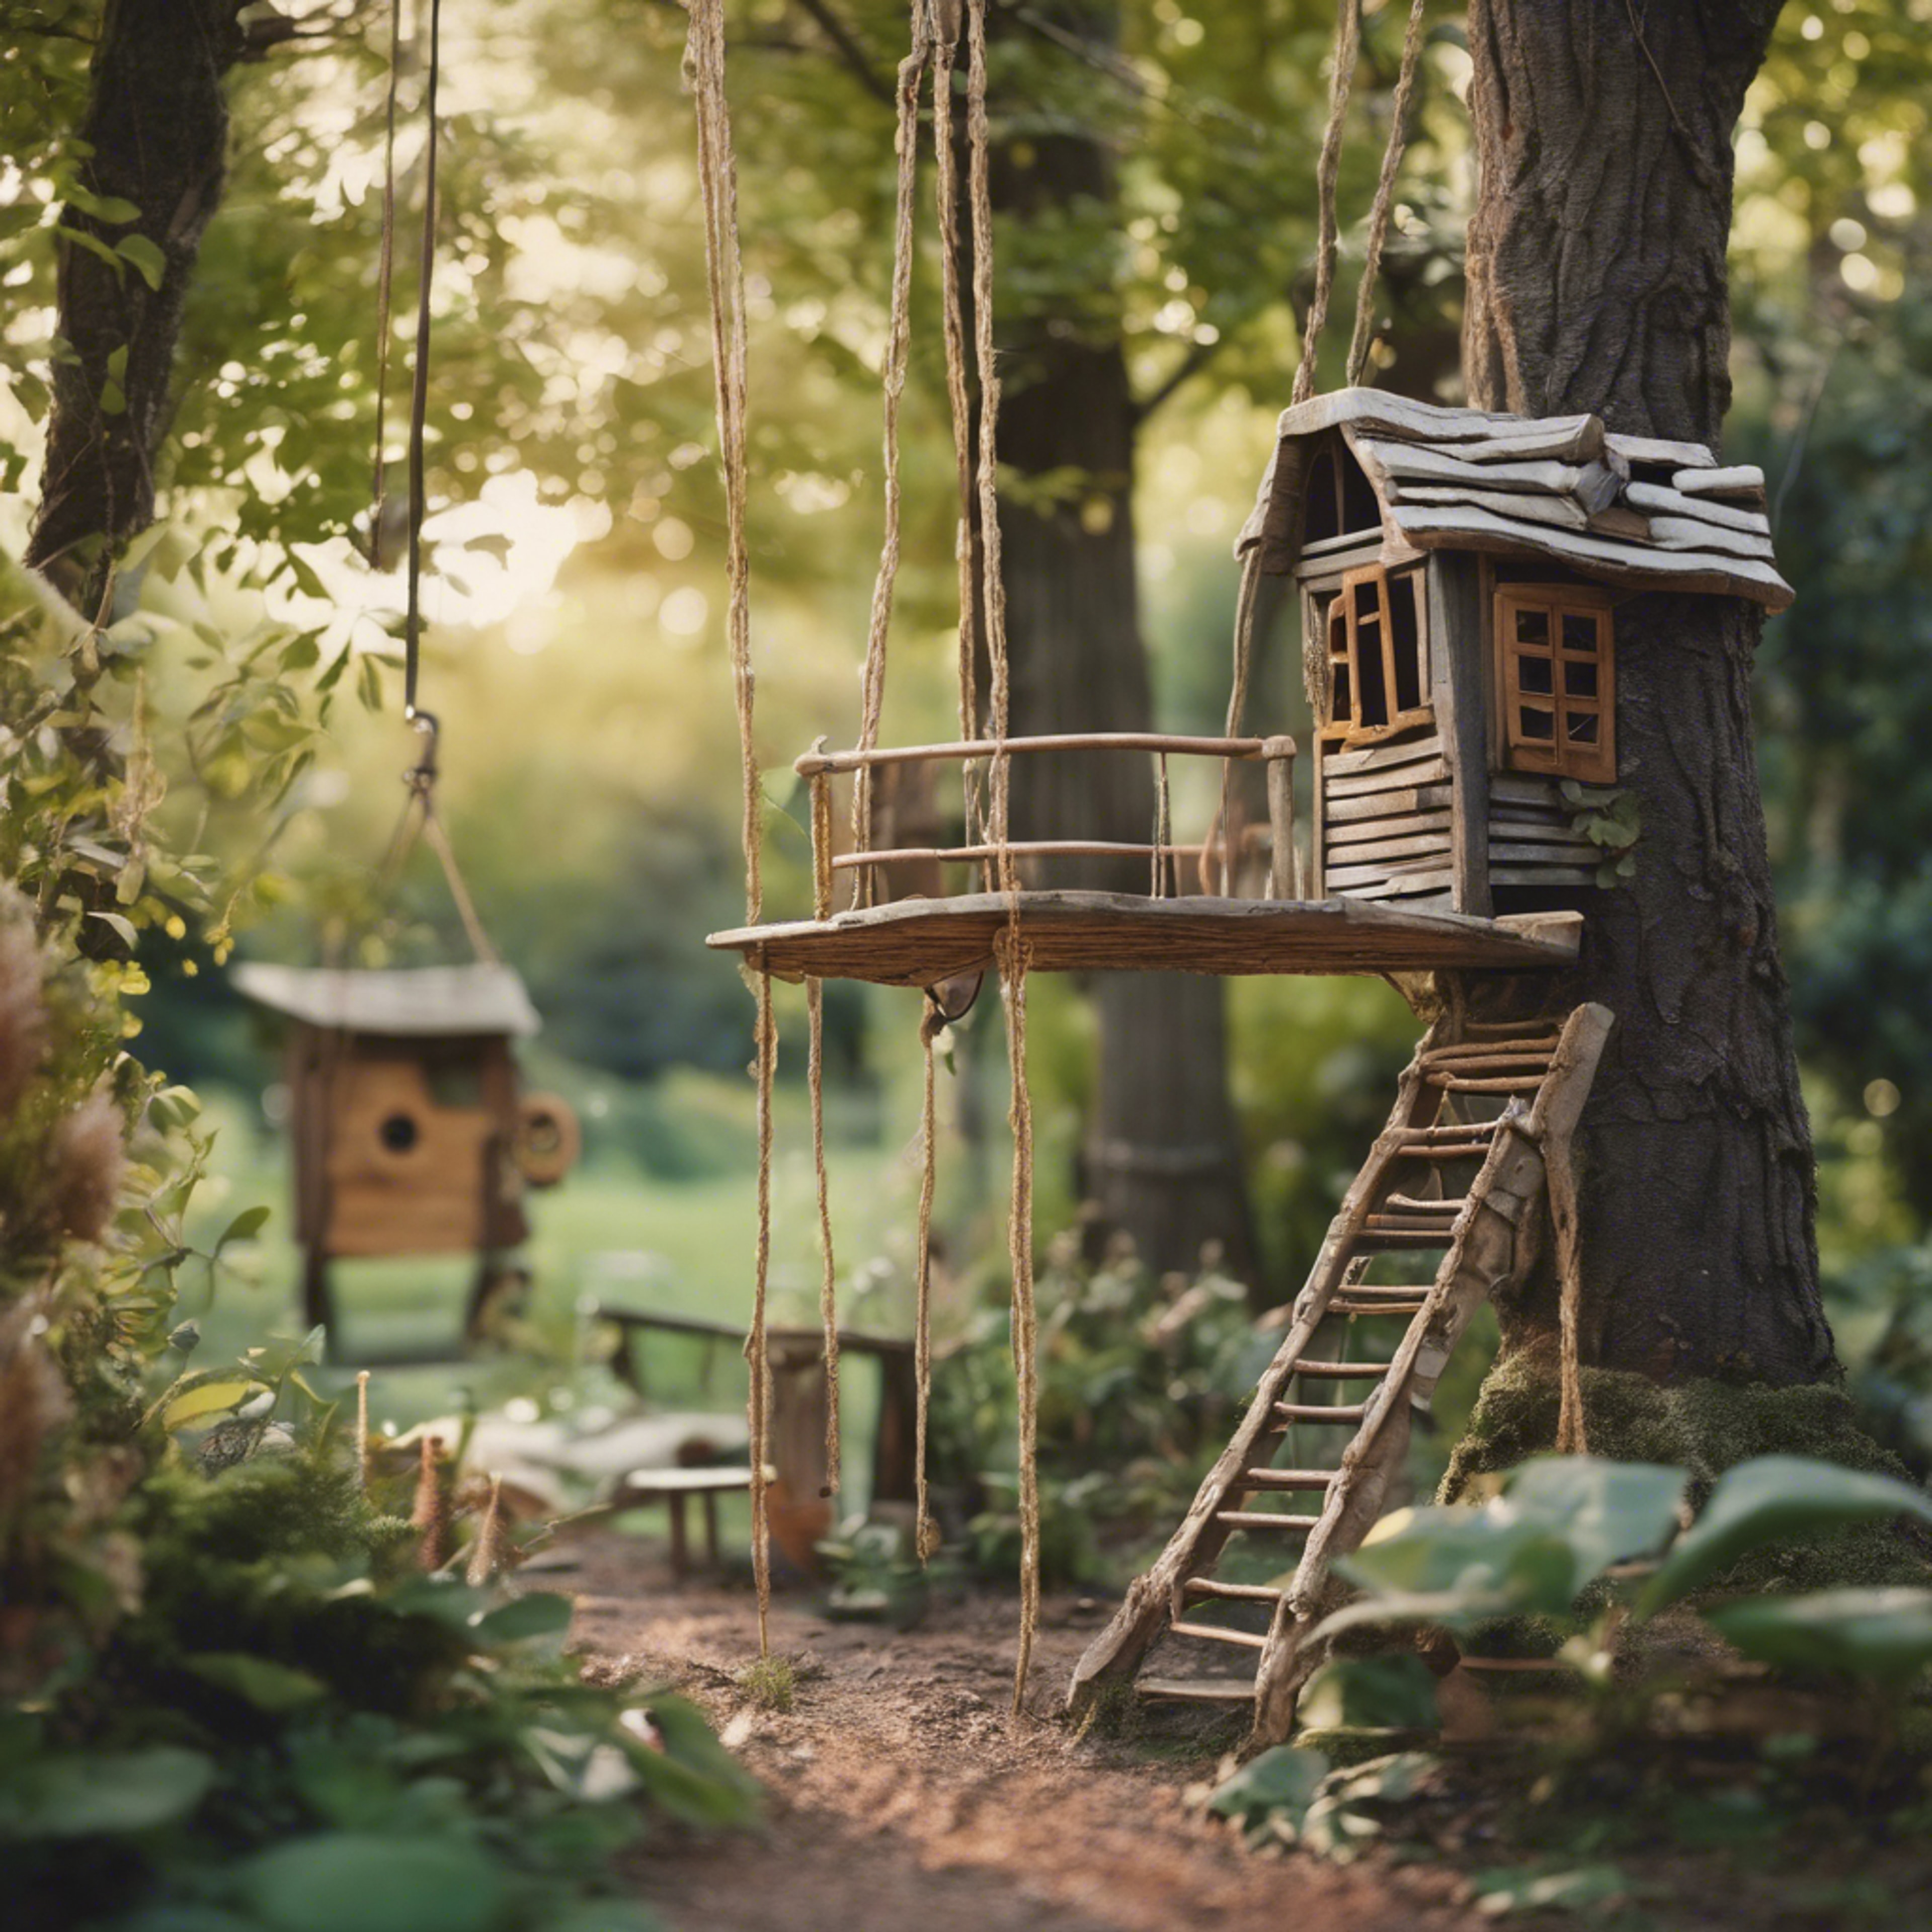 A nostalgic children’s garden filled with hidden treasures, tire swings, and treehouses built amidst towering trees. Wallpaper[4077f42451f34ca69b37]